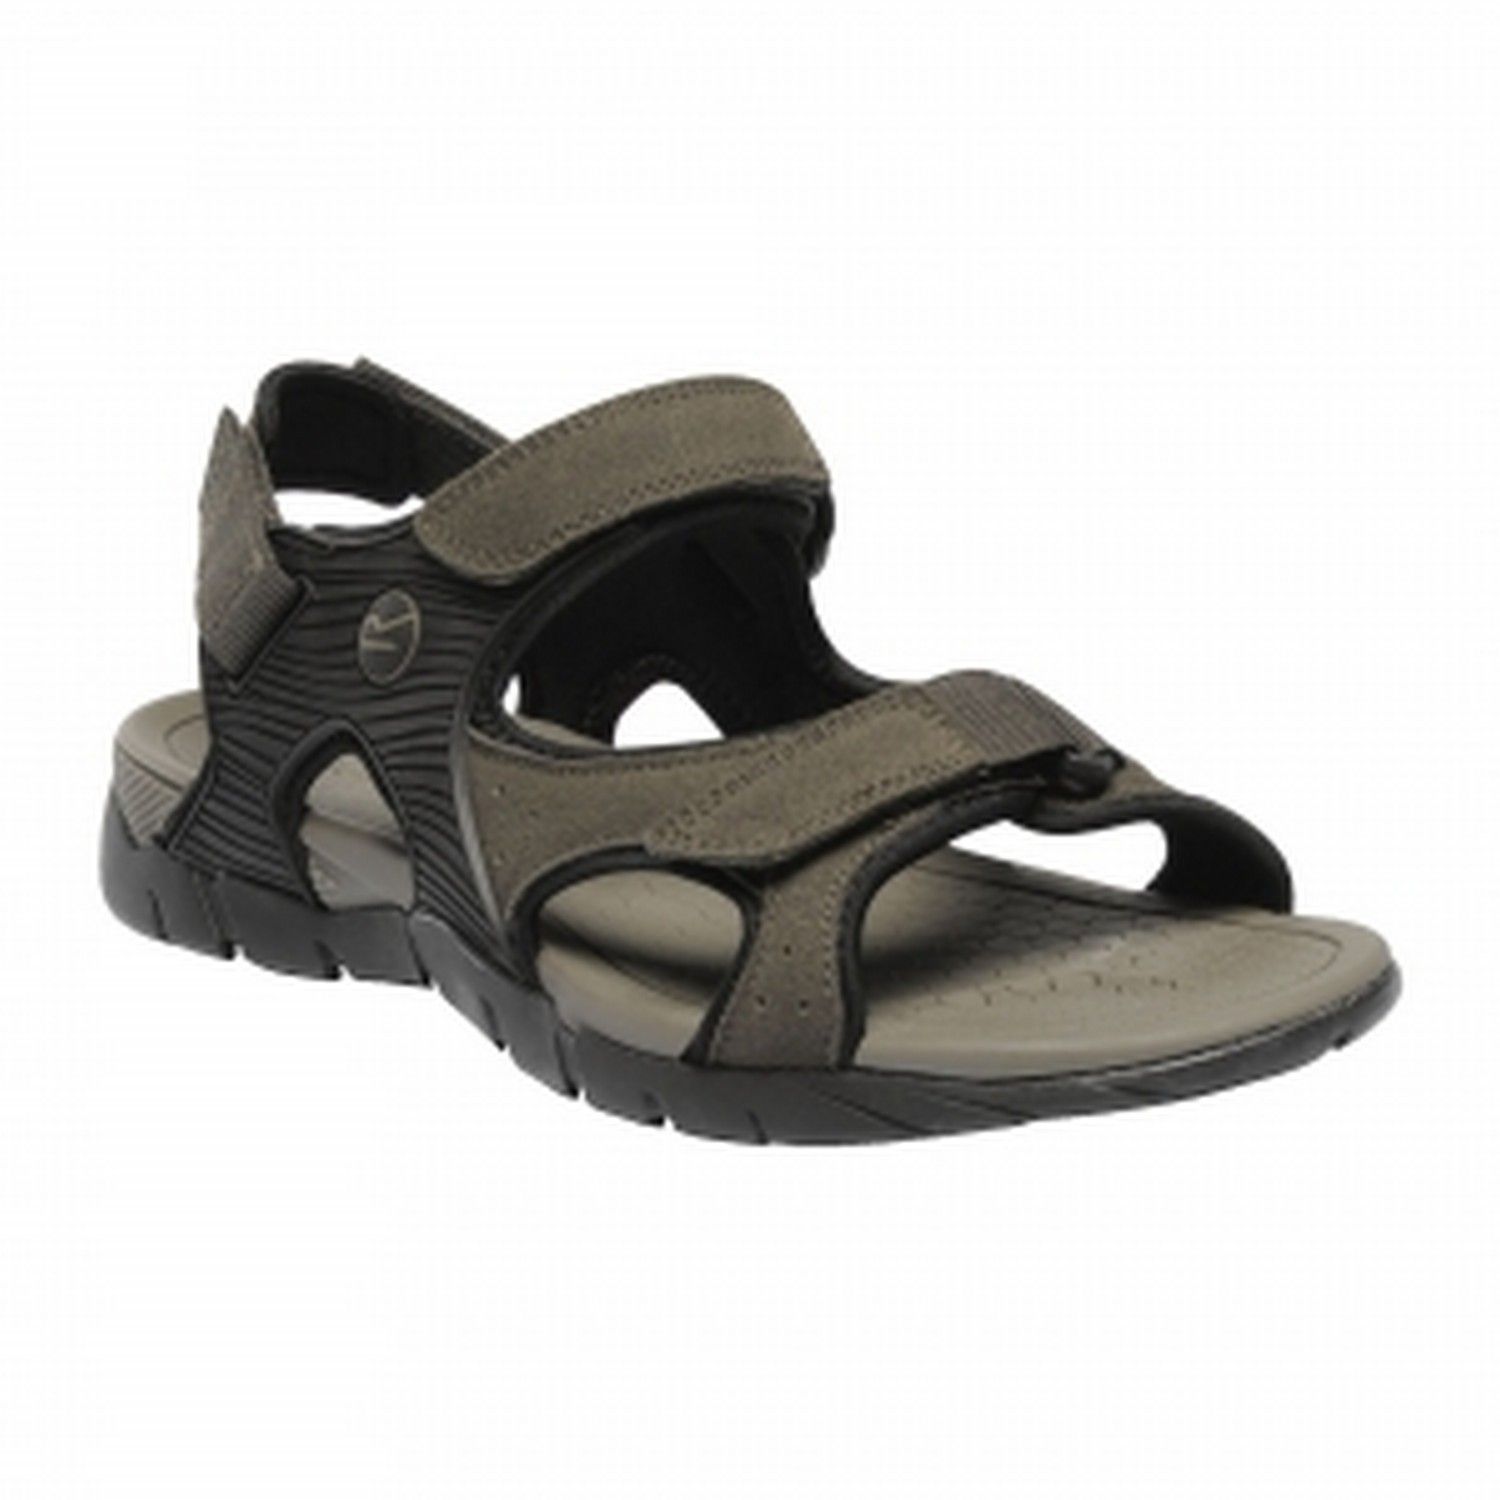 75% Suede, 15% Rubber, 10% Polyester. Rafta Classic sandal delivers friction-free comfort and support. Neoprene backed suede hugs the foot with three points of adjustment while moulded rubber stabilises and protects. EVA cushioning and a durable rubber outsole make sure you cruise through the day.